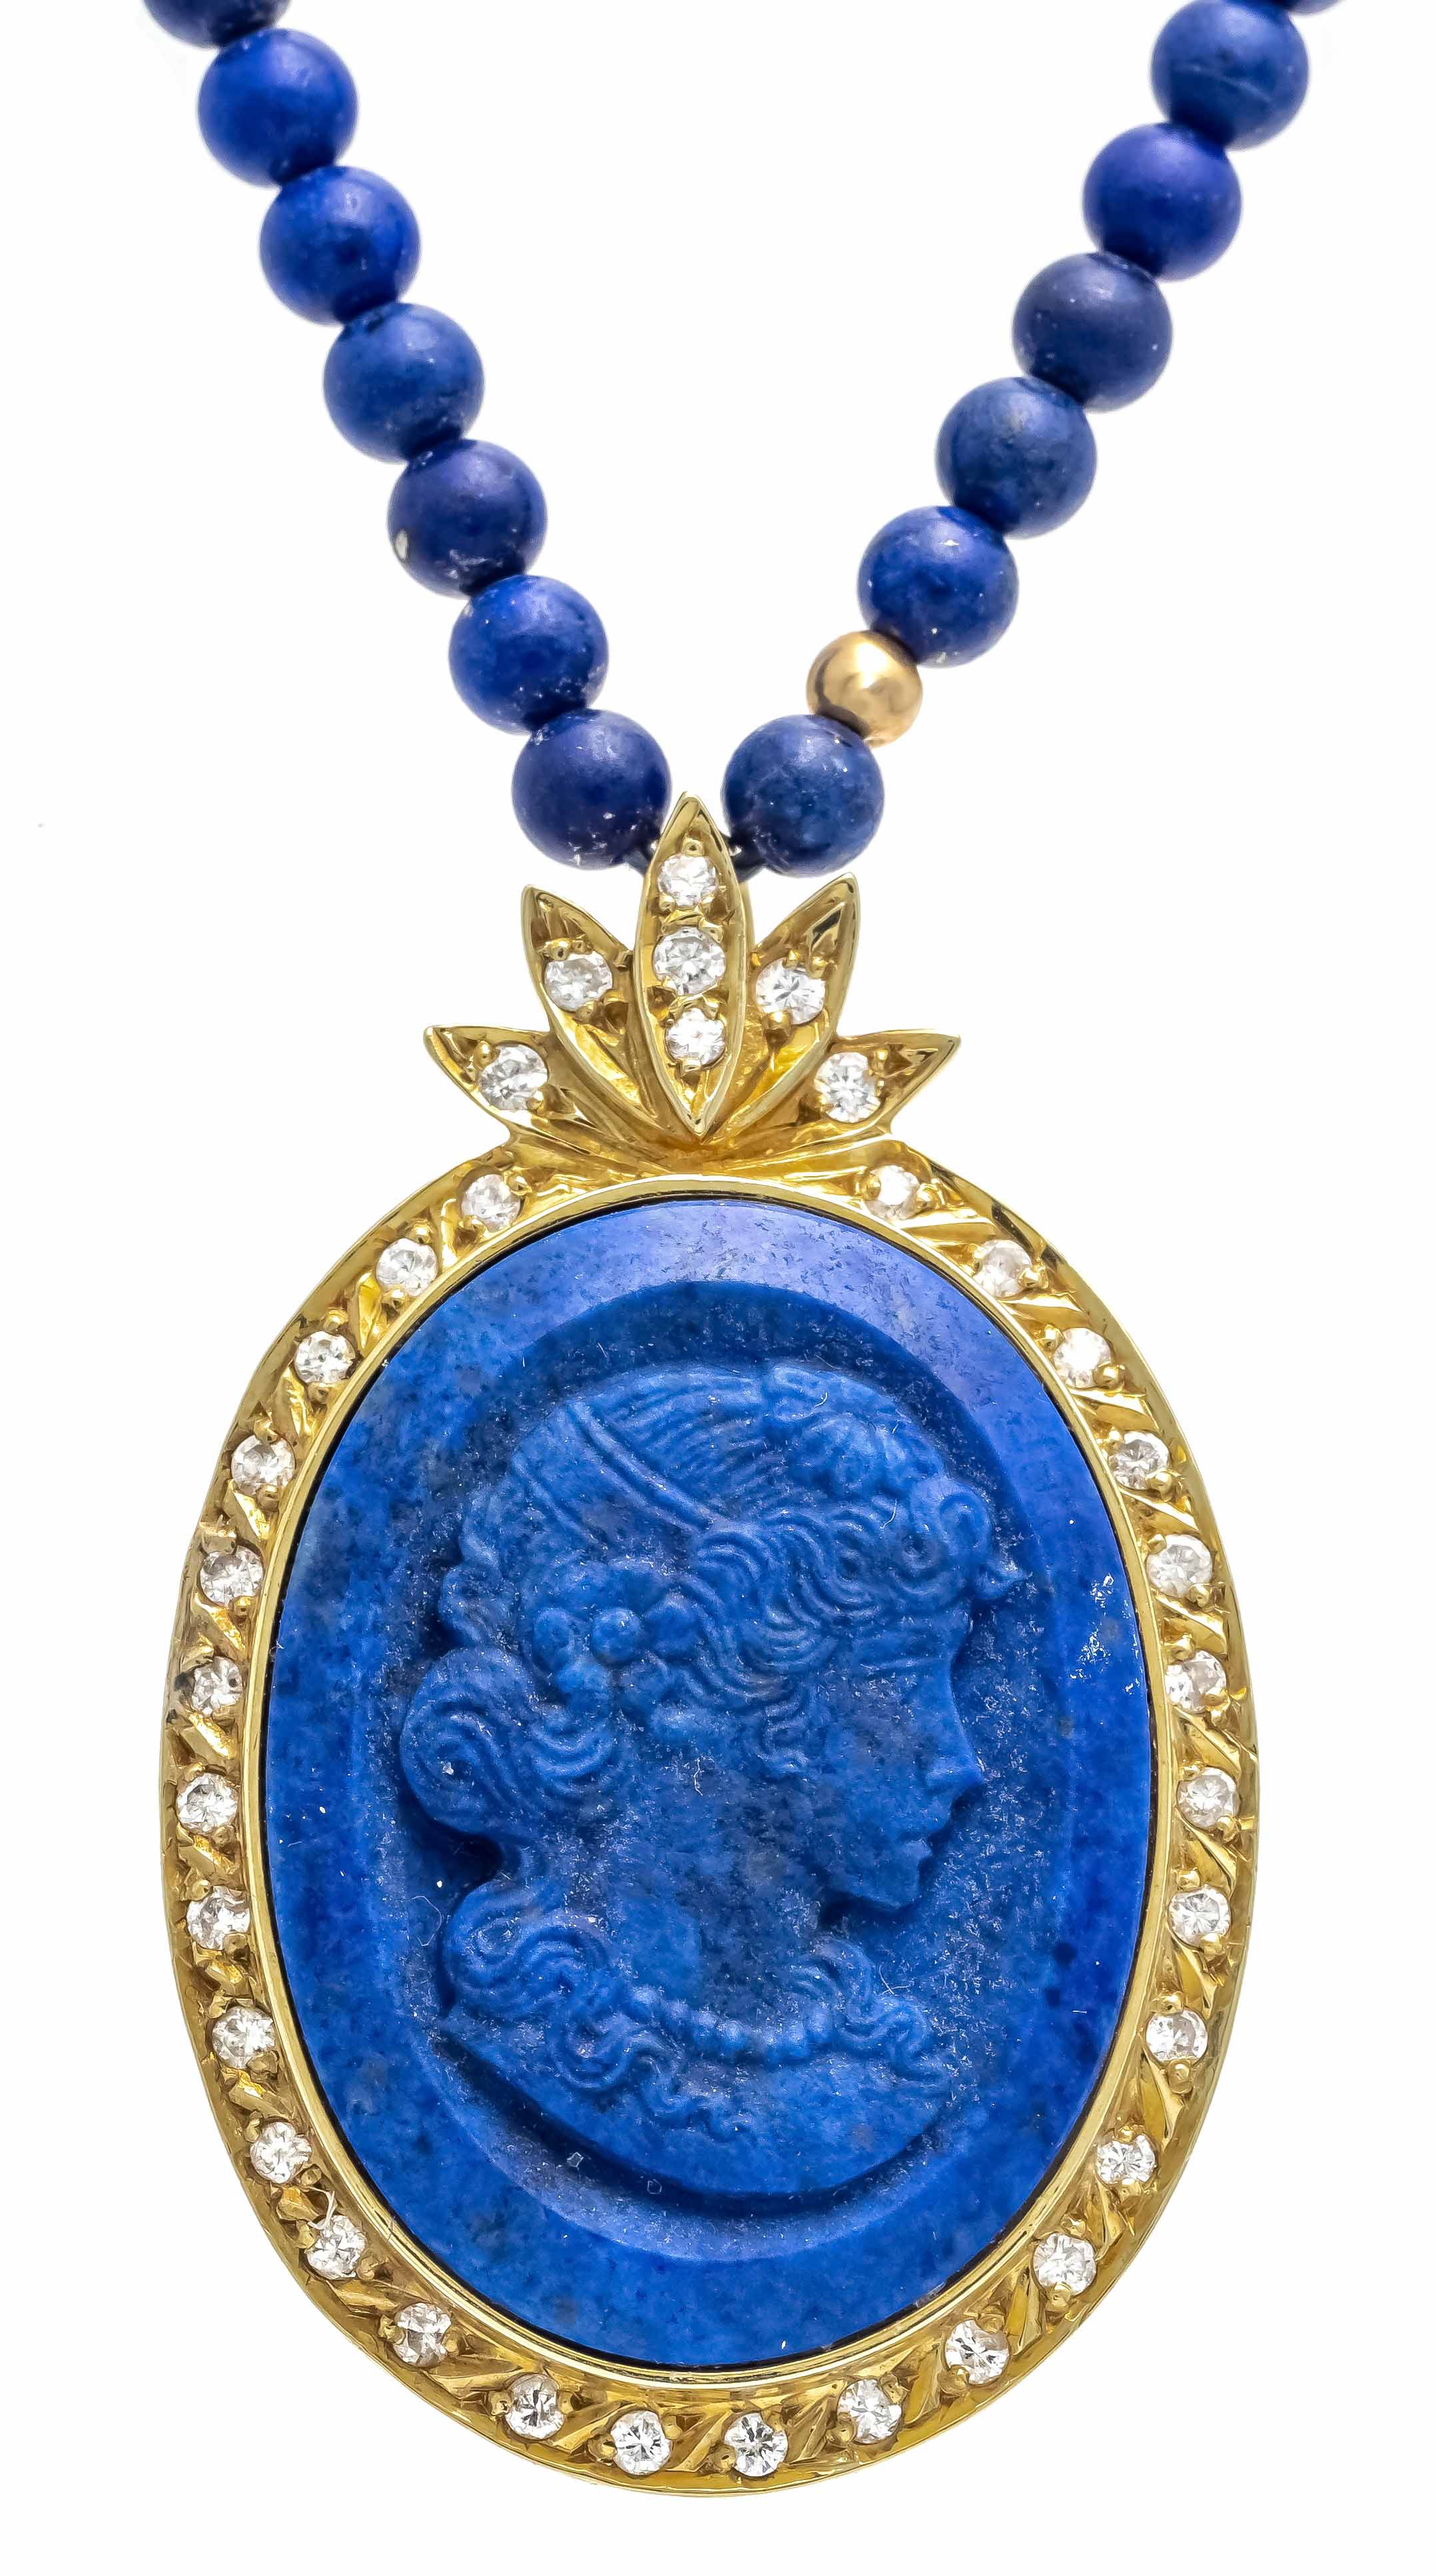 Lapis lazuli gem pendant GG 585/000 with an oval in the shape of an antique lady portrait very